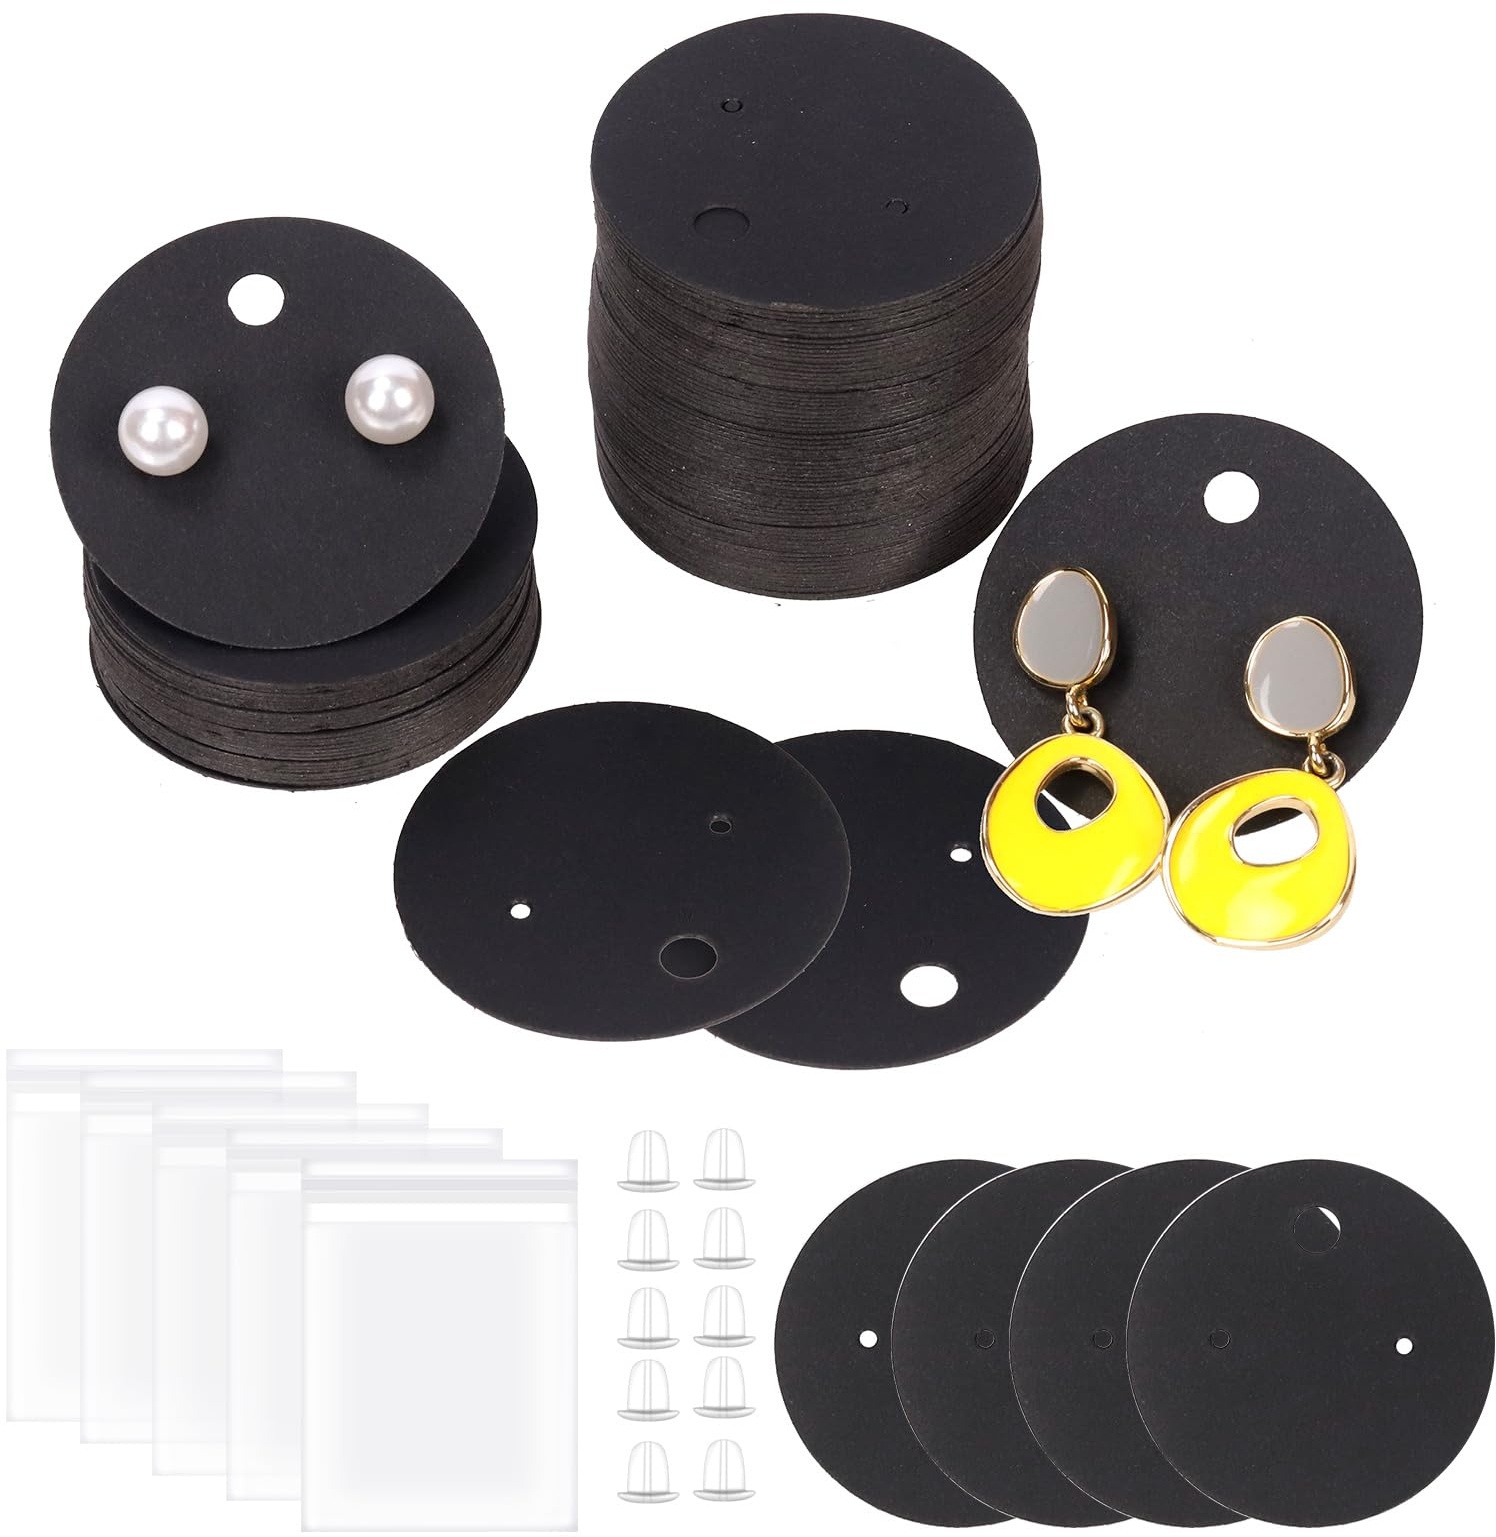 Tanstic 600Pcs Round Earring Display Cards Kit, 40mm/1.57" Earring Cards, Earring Card Holder, Earring Packing Cards with Earring Backs and Self-Sealing Bags for Jewelry Display(Black)